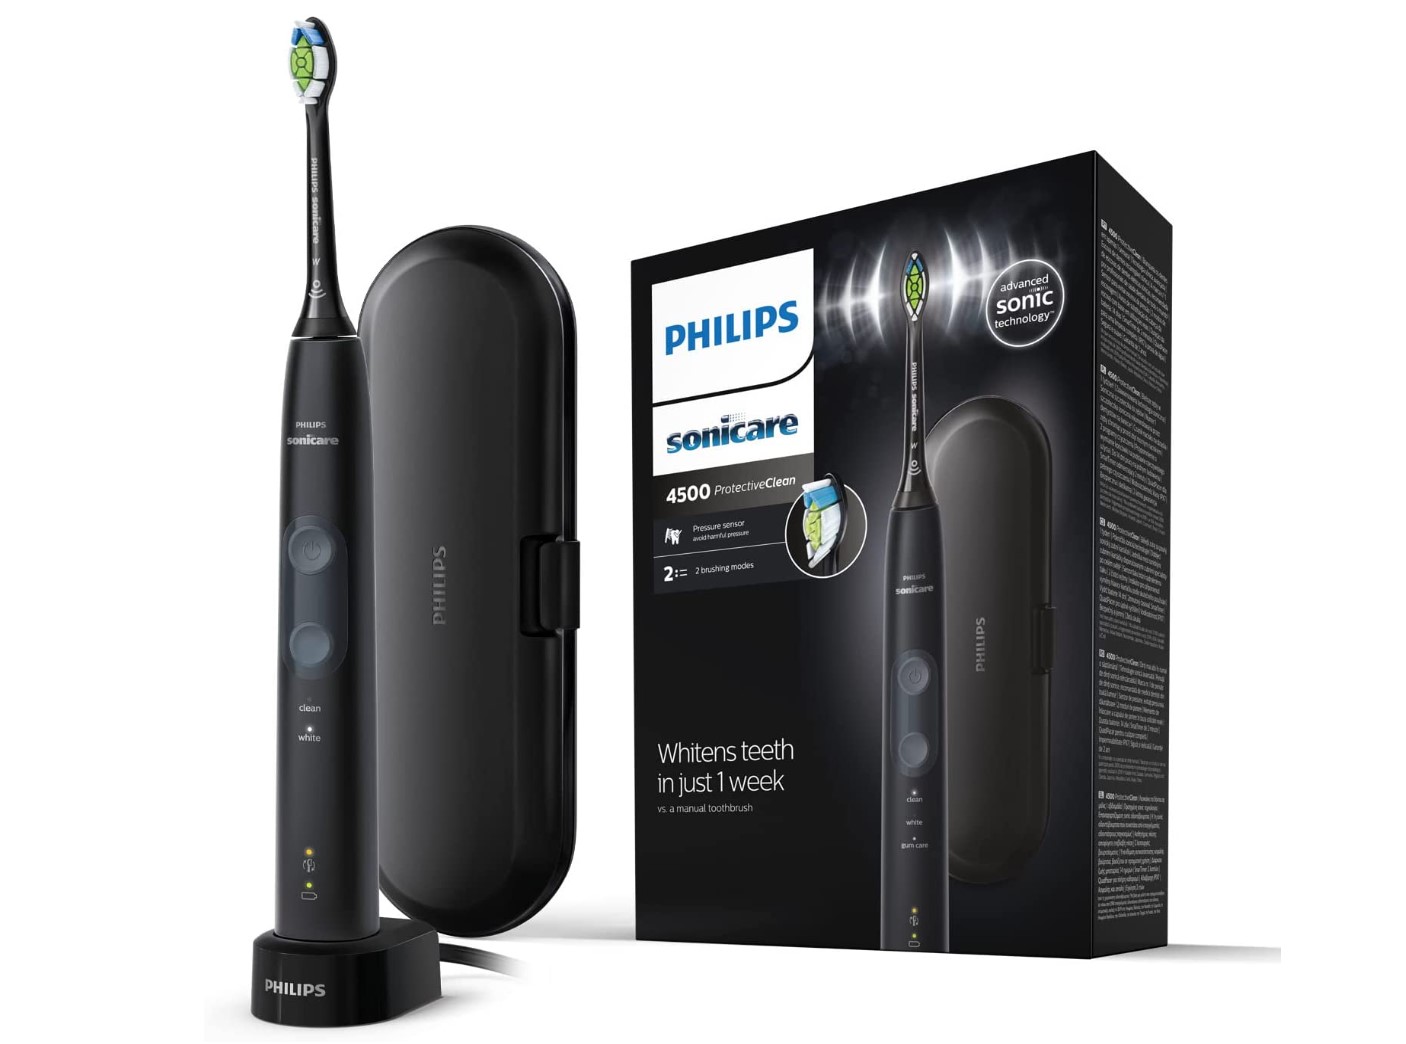 TOP 05. Philips Sonicare 4500